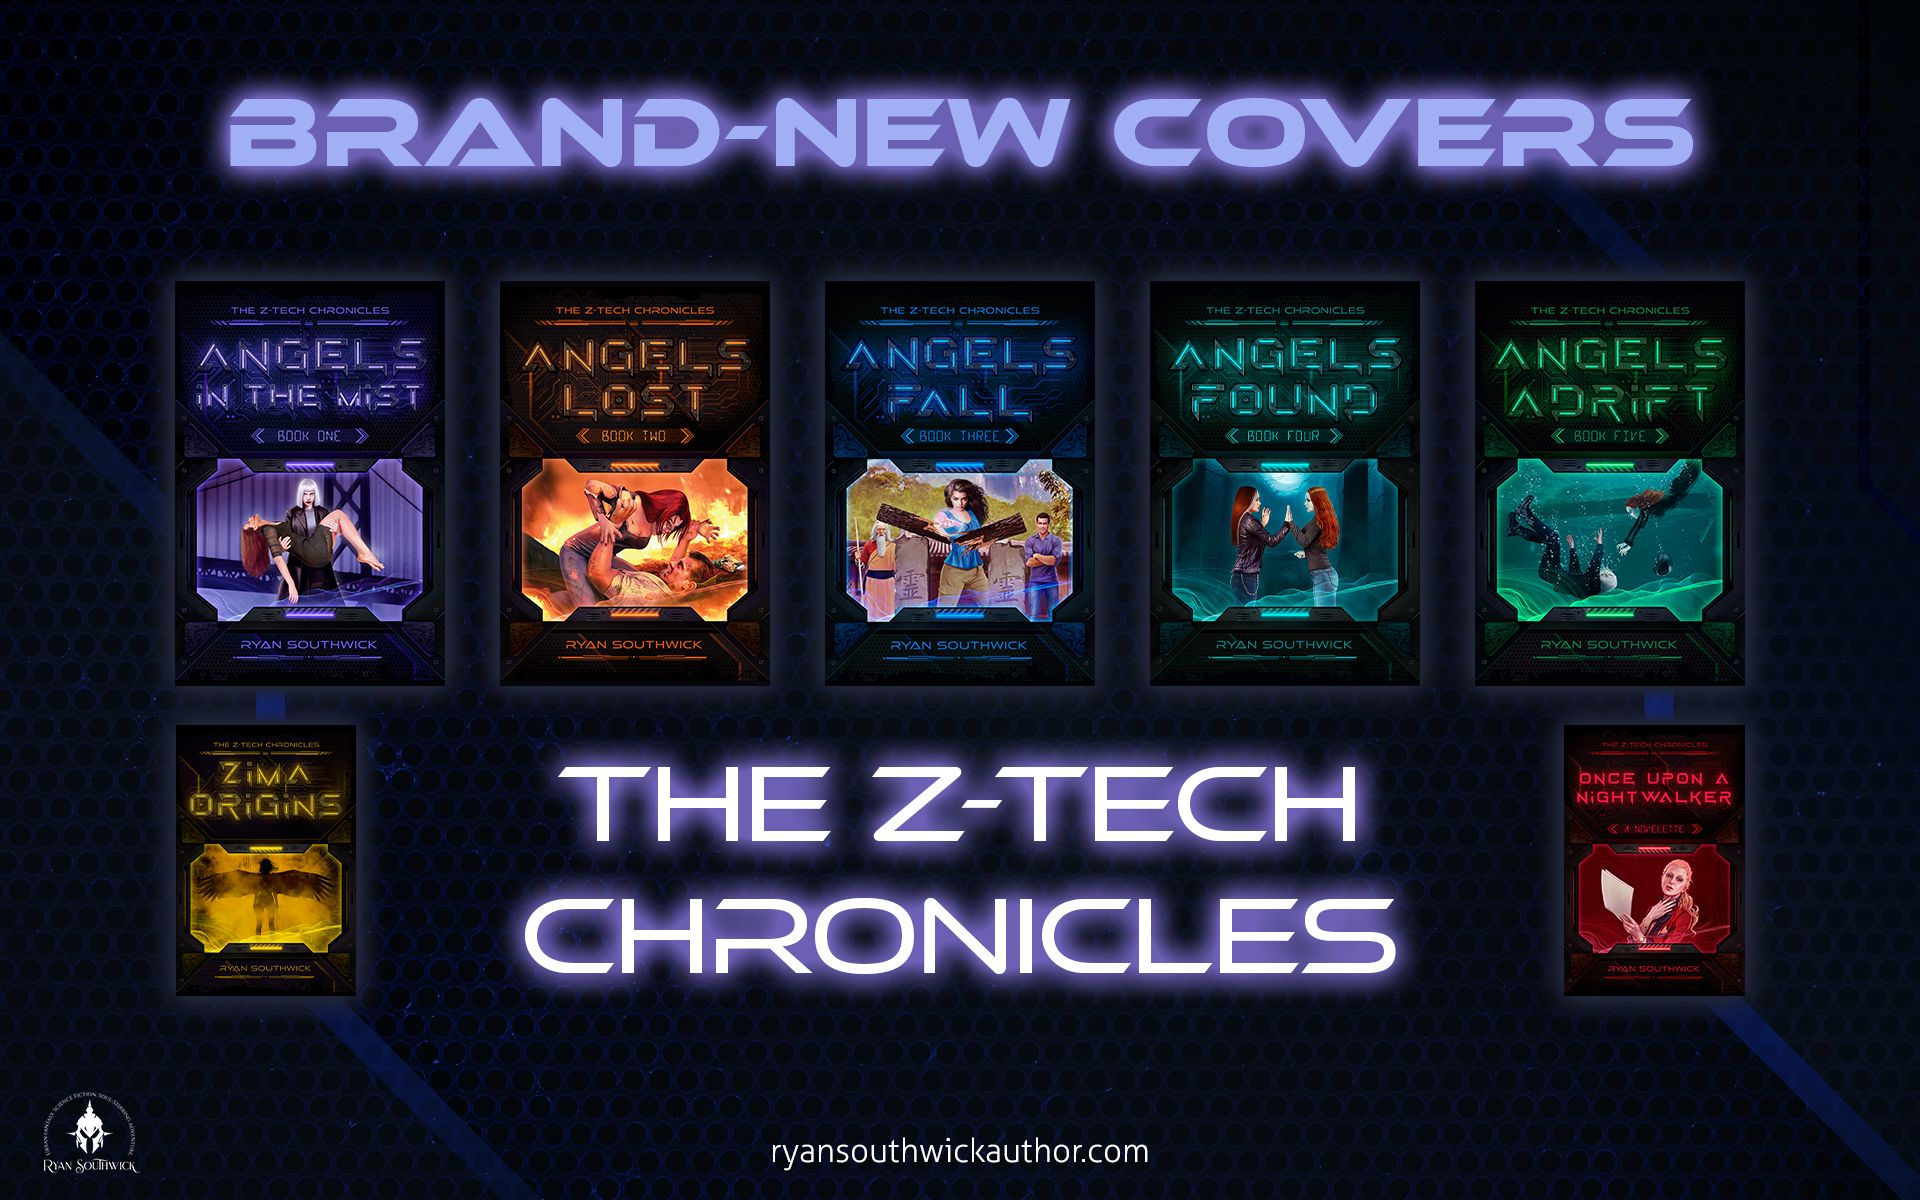 7 books with a Tron-like theme: "Brand-New Covers. The Z-Tech Chronicles"